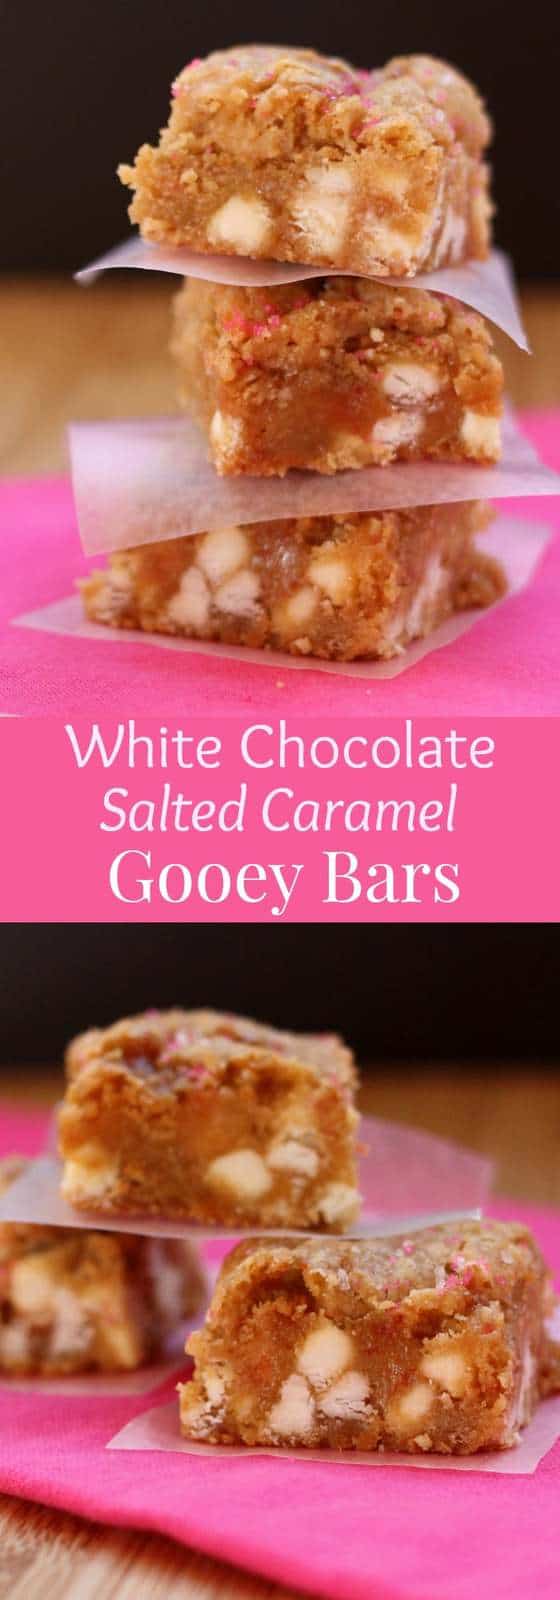 White Choclate Salted Caramel Gooey Bars - the best blondies ever. You'll love this cookie bar recipe for a sweet dessert!